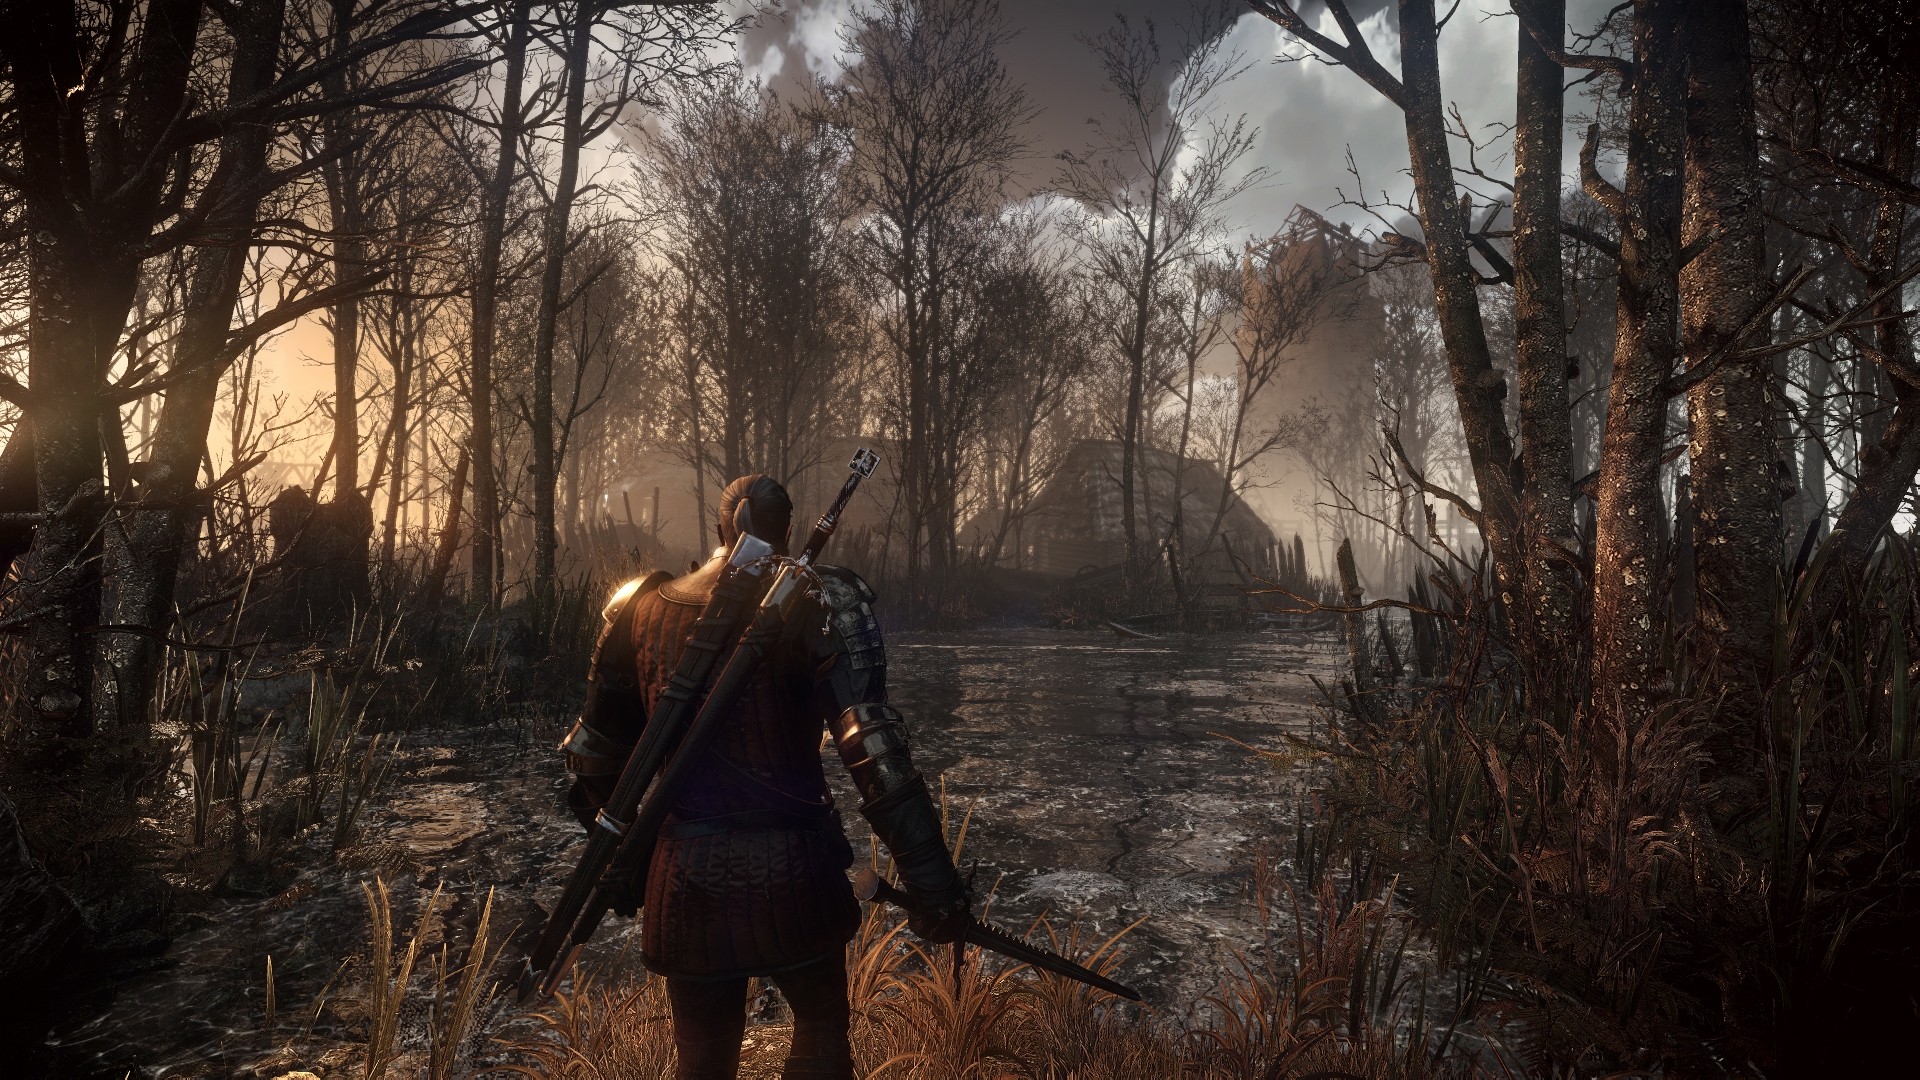 General 1920x1080 video games The Witcher The Witcher 3: Wild Hunt Geralt of Rivia screen shot RPG PC gaming